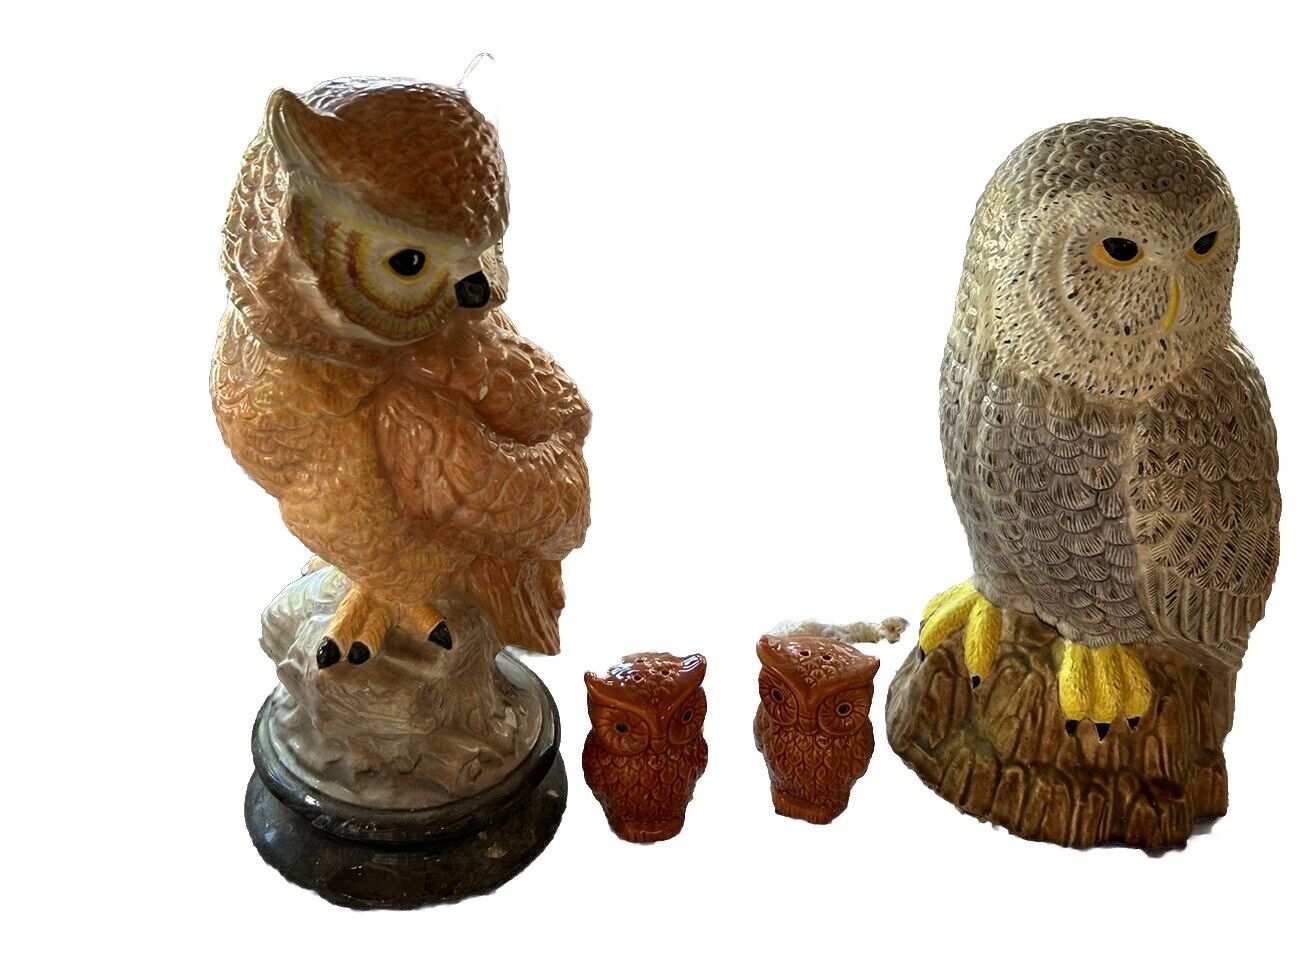 Ceramic Owl Set - 3 Owl Sculptures and one Set of Owl Salt And Pepper Shakers